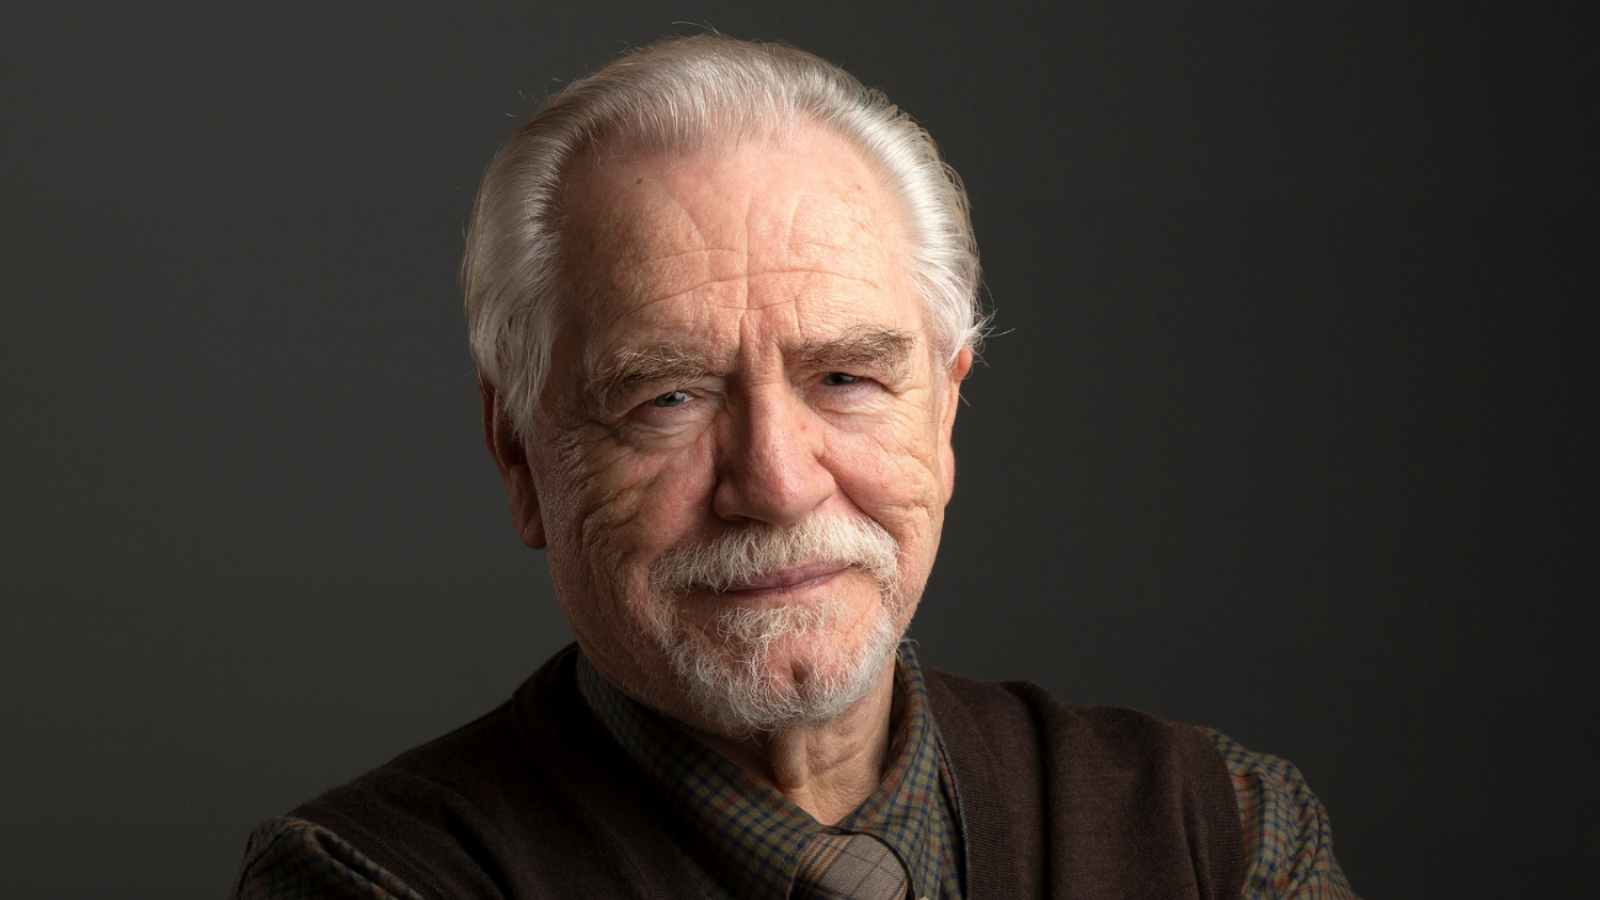 An older man with white hair and a beard, wearing a dark shirt. It is Brian Cox. The text reads 